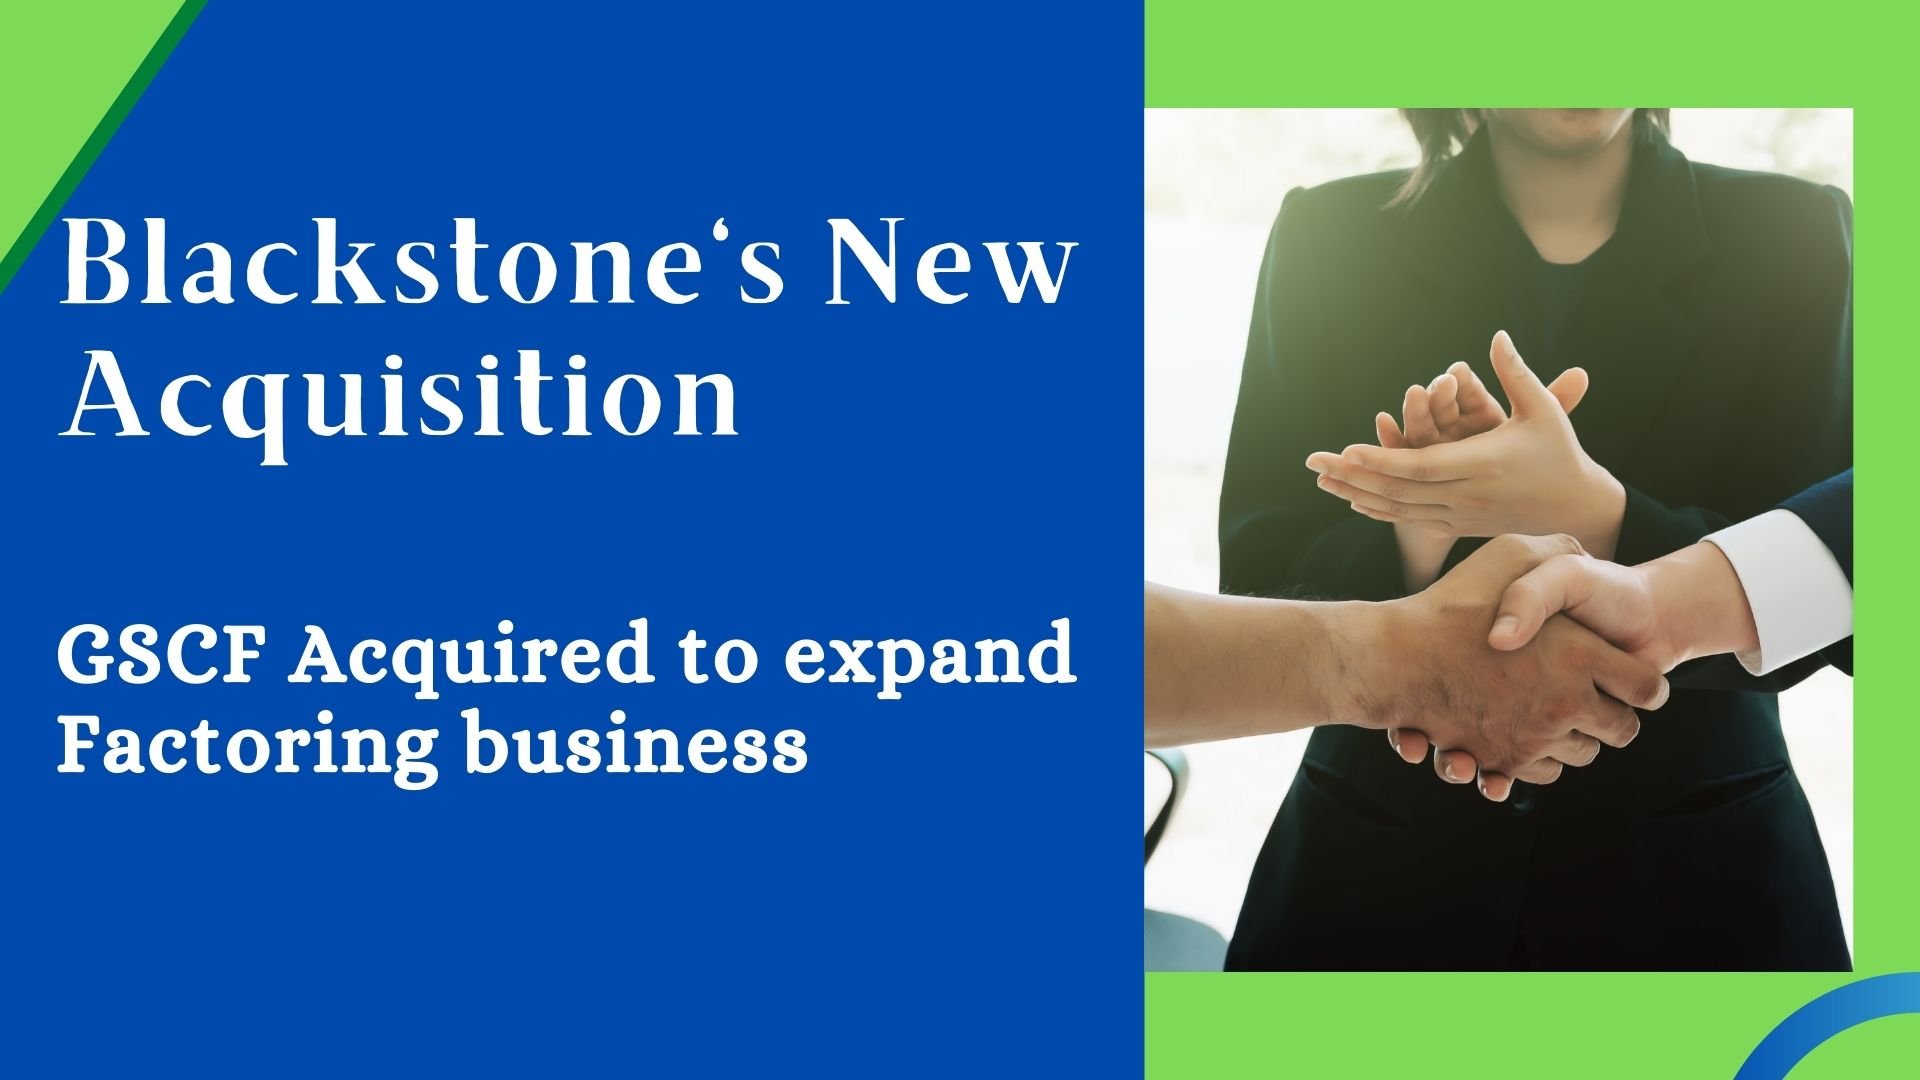 Blackstone's New Acquisition GSCF Acquired to expand Factoring business finmargin